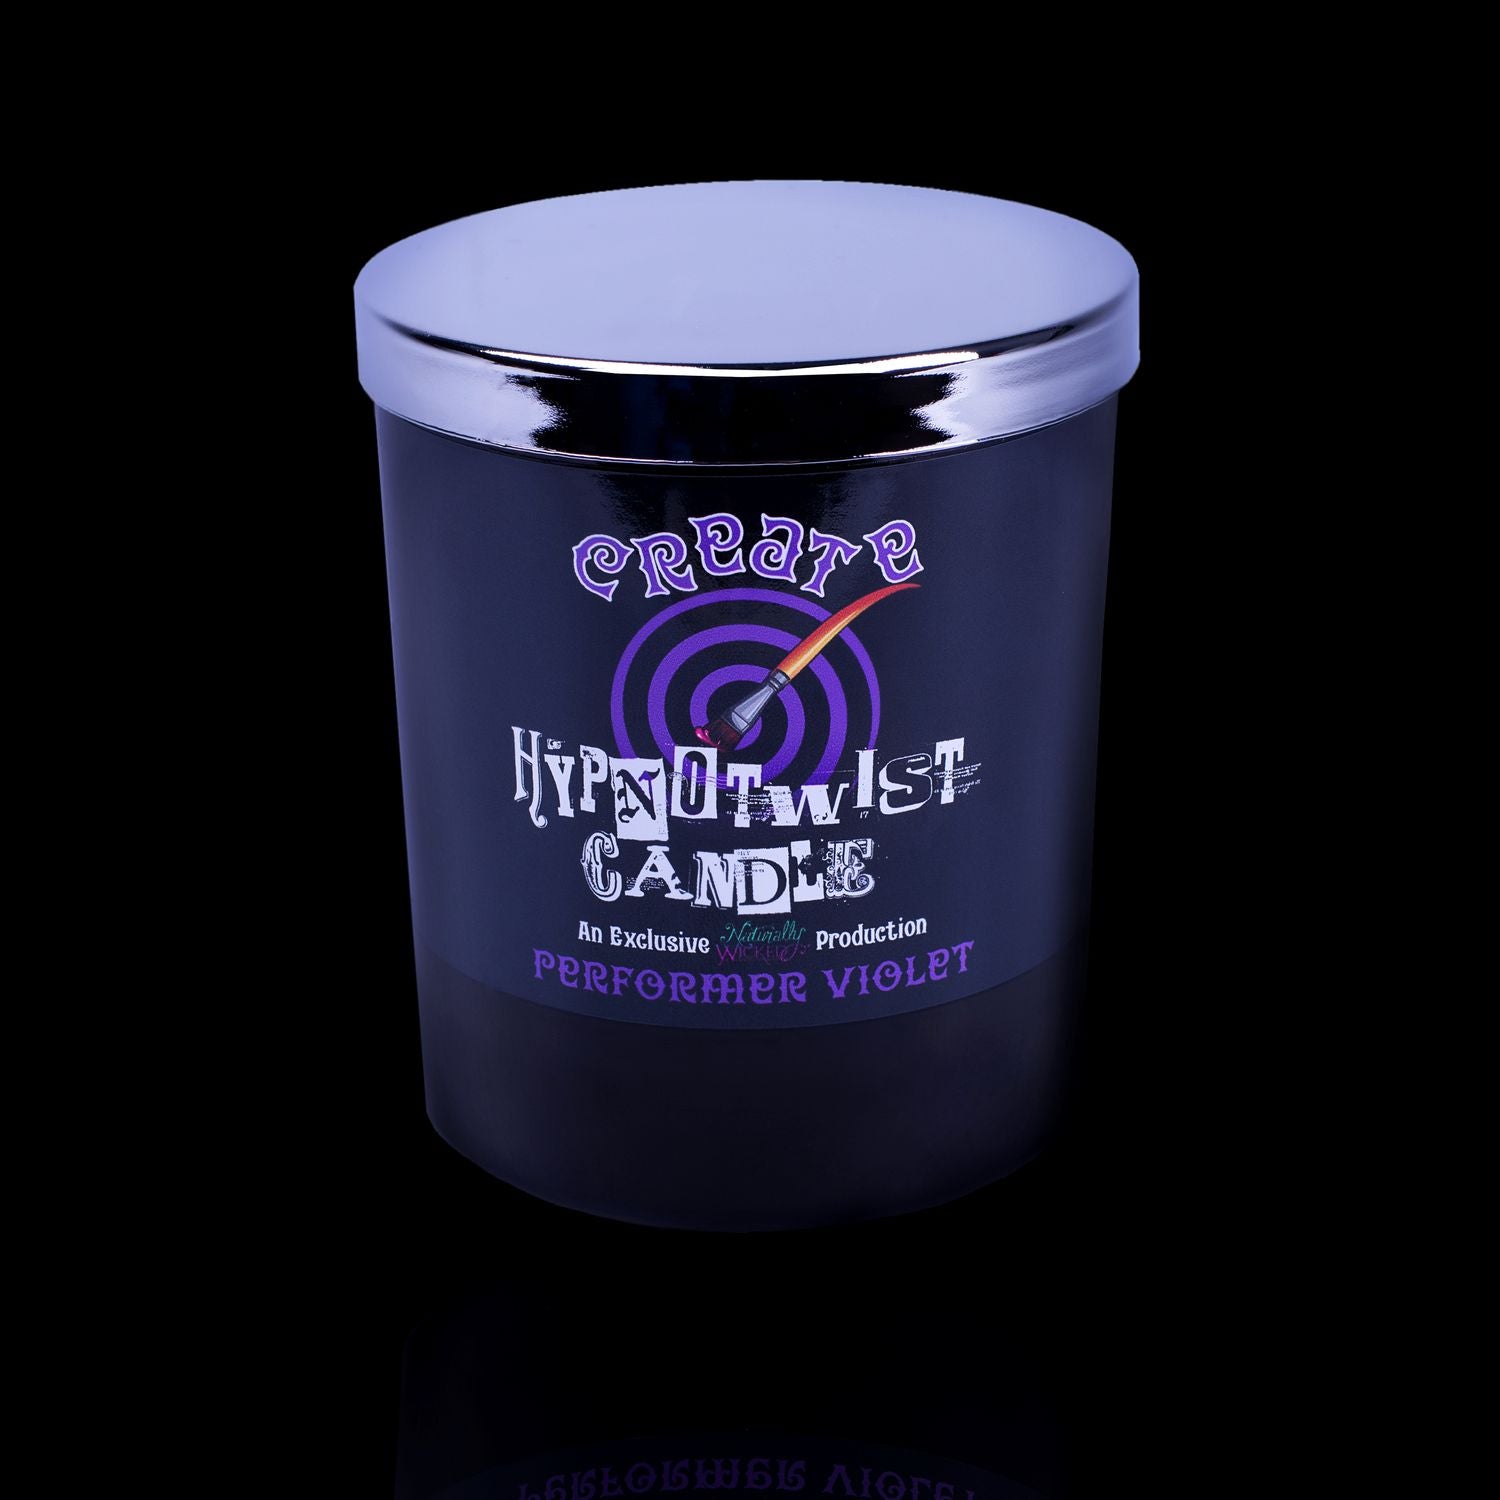 Create Your Own World With The Naturally Wicked Hypnotwist Create Candle Featuring Plant-based Soy Purple Wax Scented With Performer Violet & Includes A Lepidolite Crystal Spinning Top & Mirrored Lid